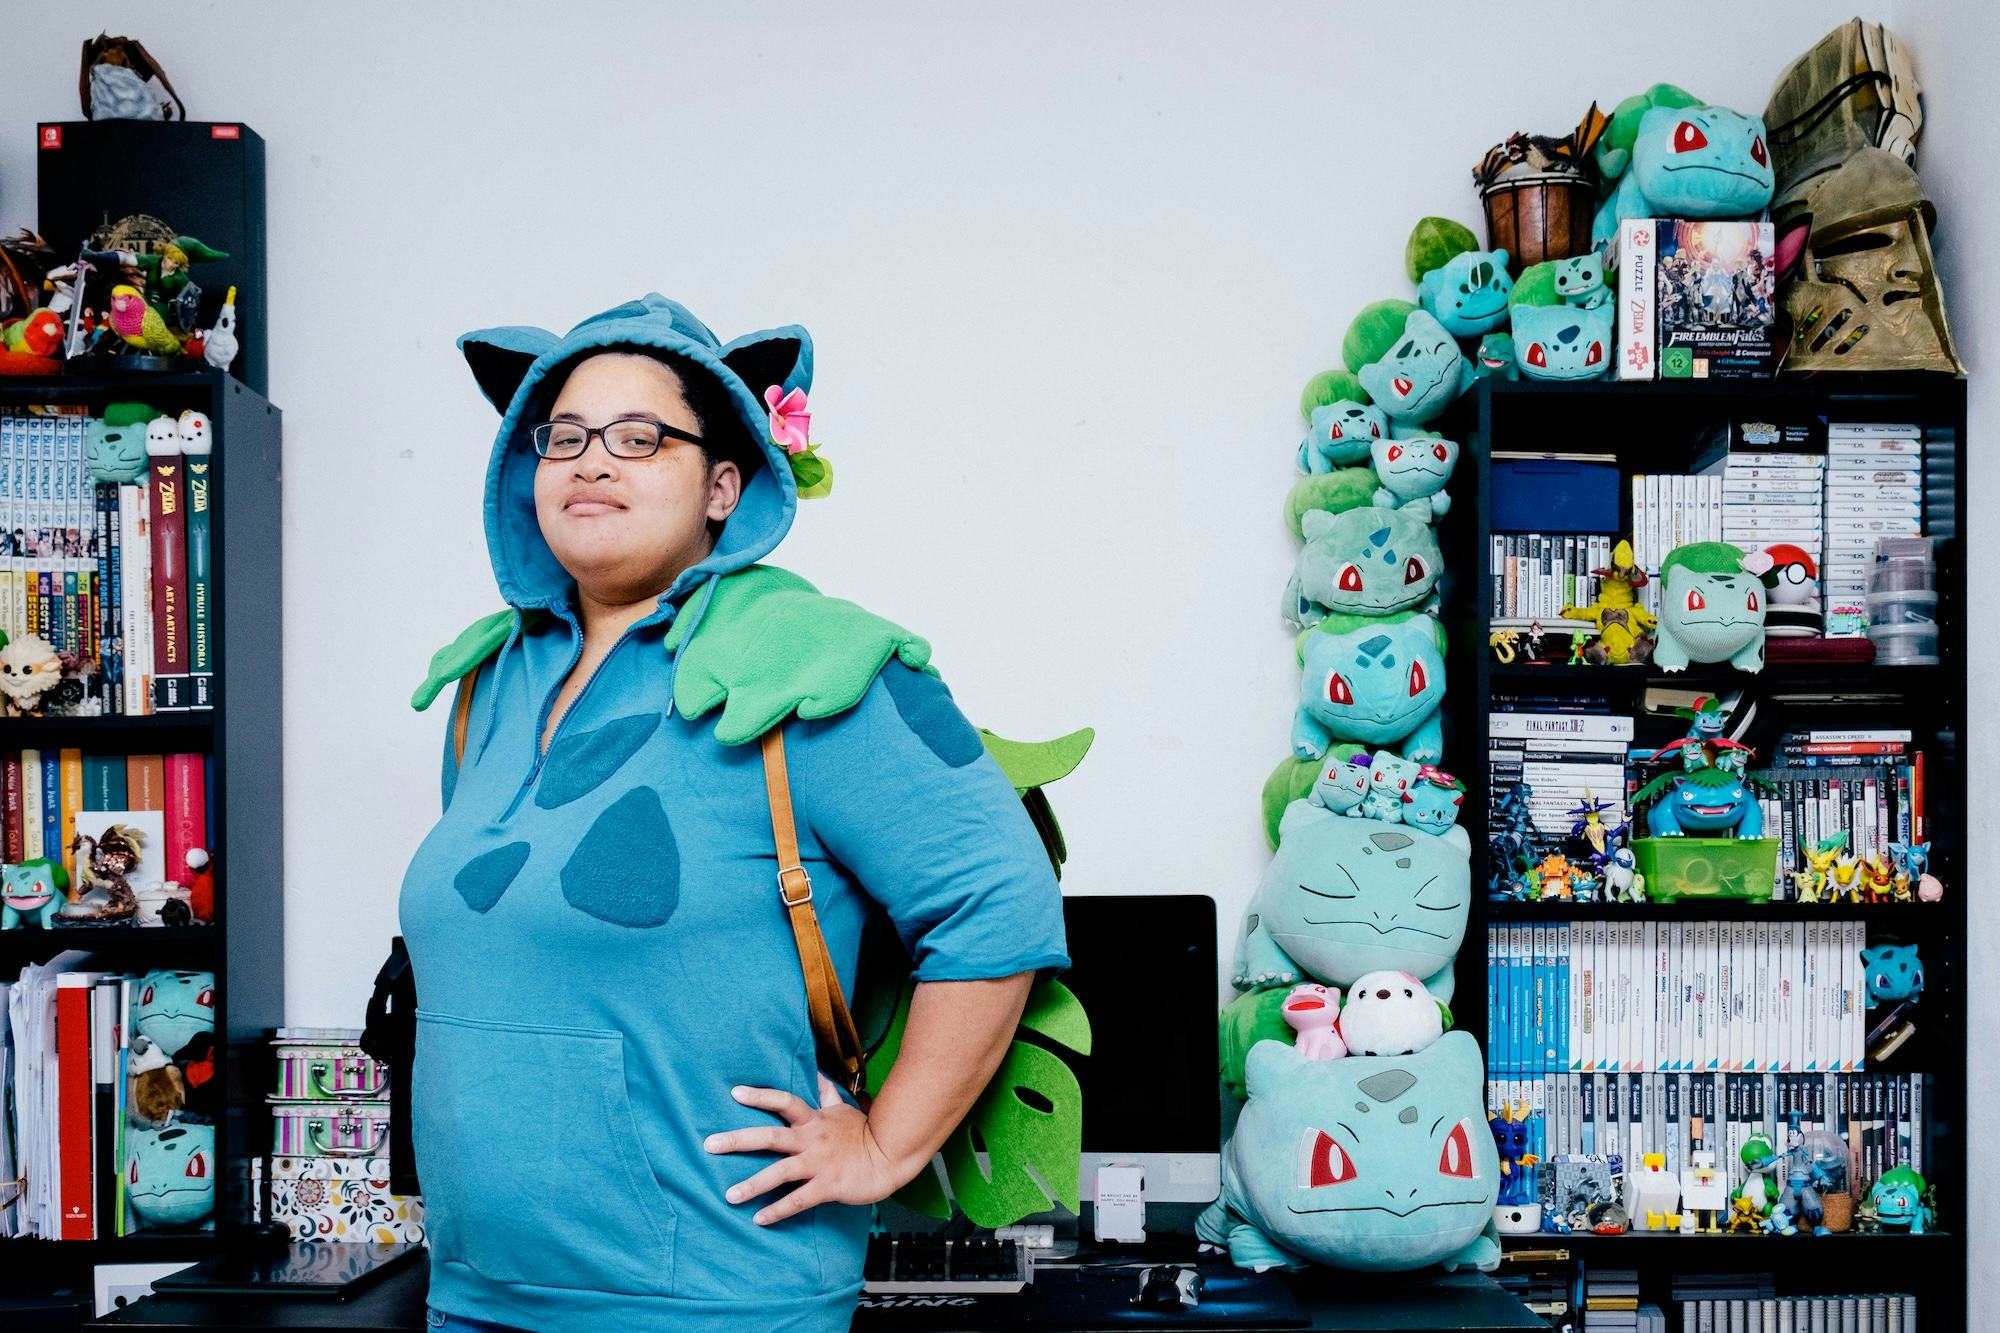 Person proudly posing in the bedroom with many Bulbasaur figures stacked behind